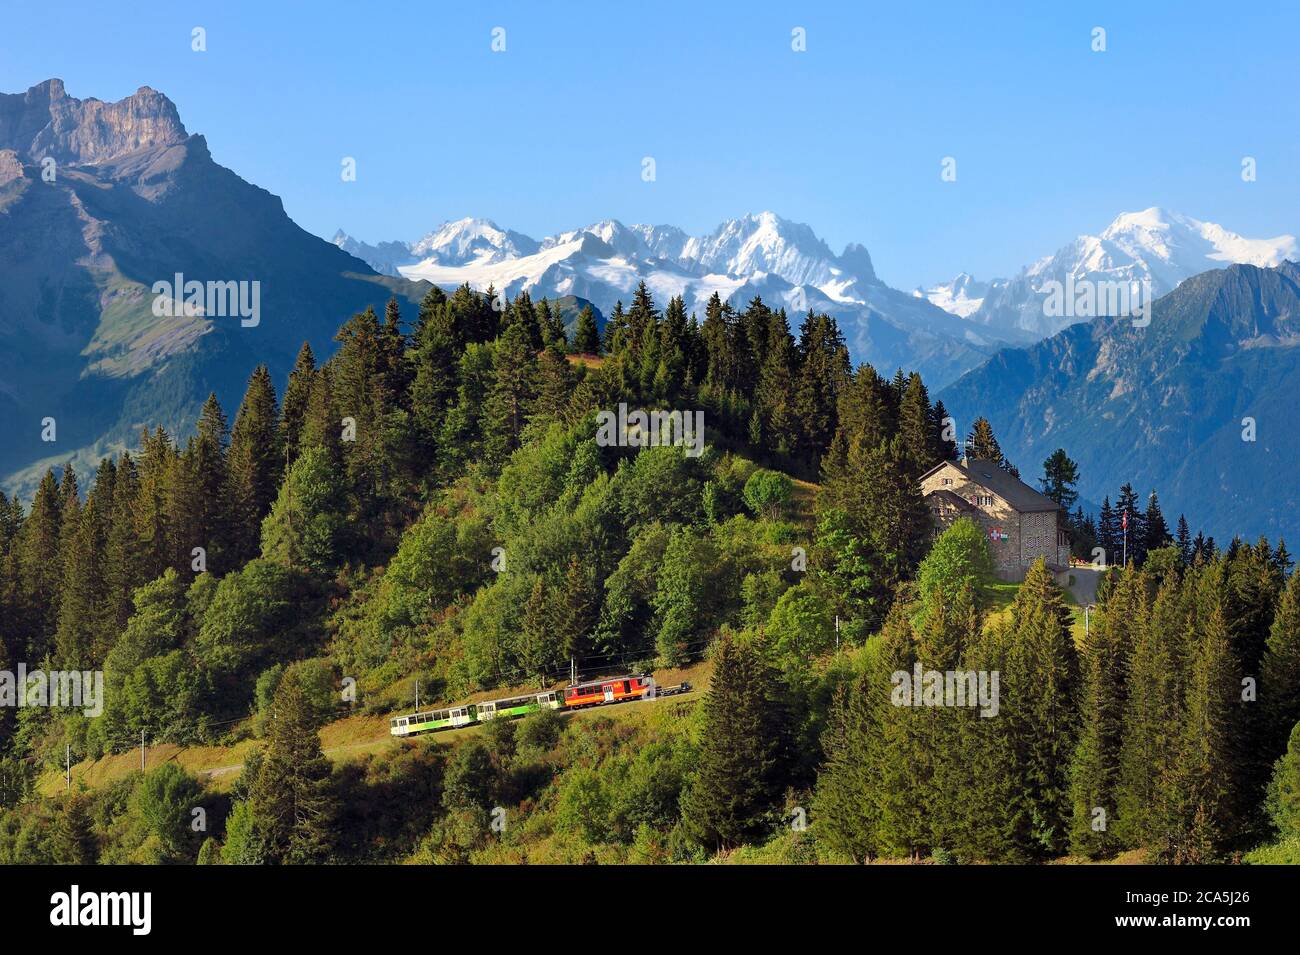 Switzerland, Canton of Vaud, Villars-sur-Ollon, train to the Bretaye pass station at the Bouquetins station and Mont-Blanc in the background Stock Photo